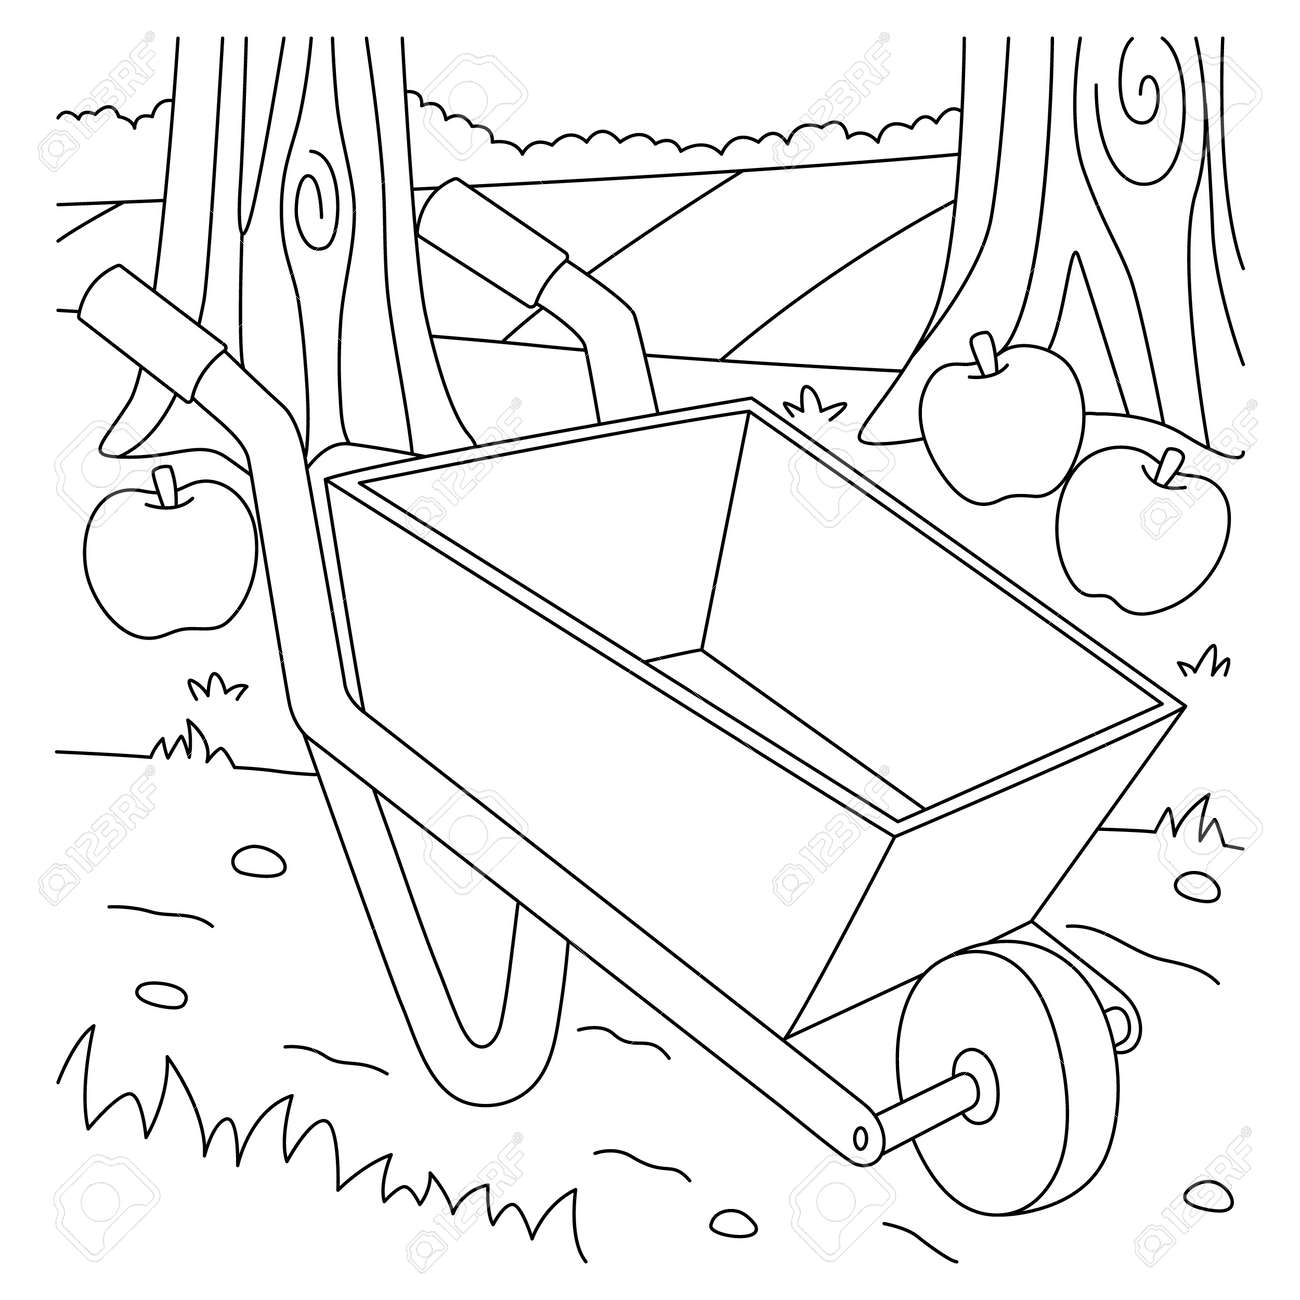 Wheelbarrow coloring page for kids royalty free svg cliparts vectors and stock illustration image